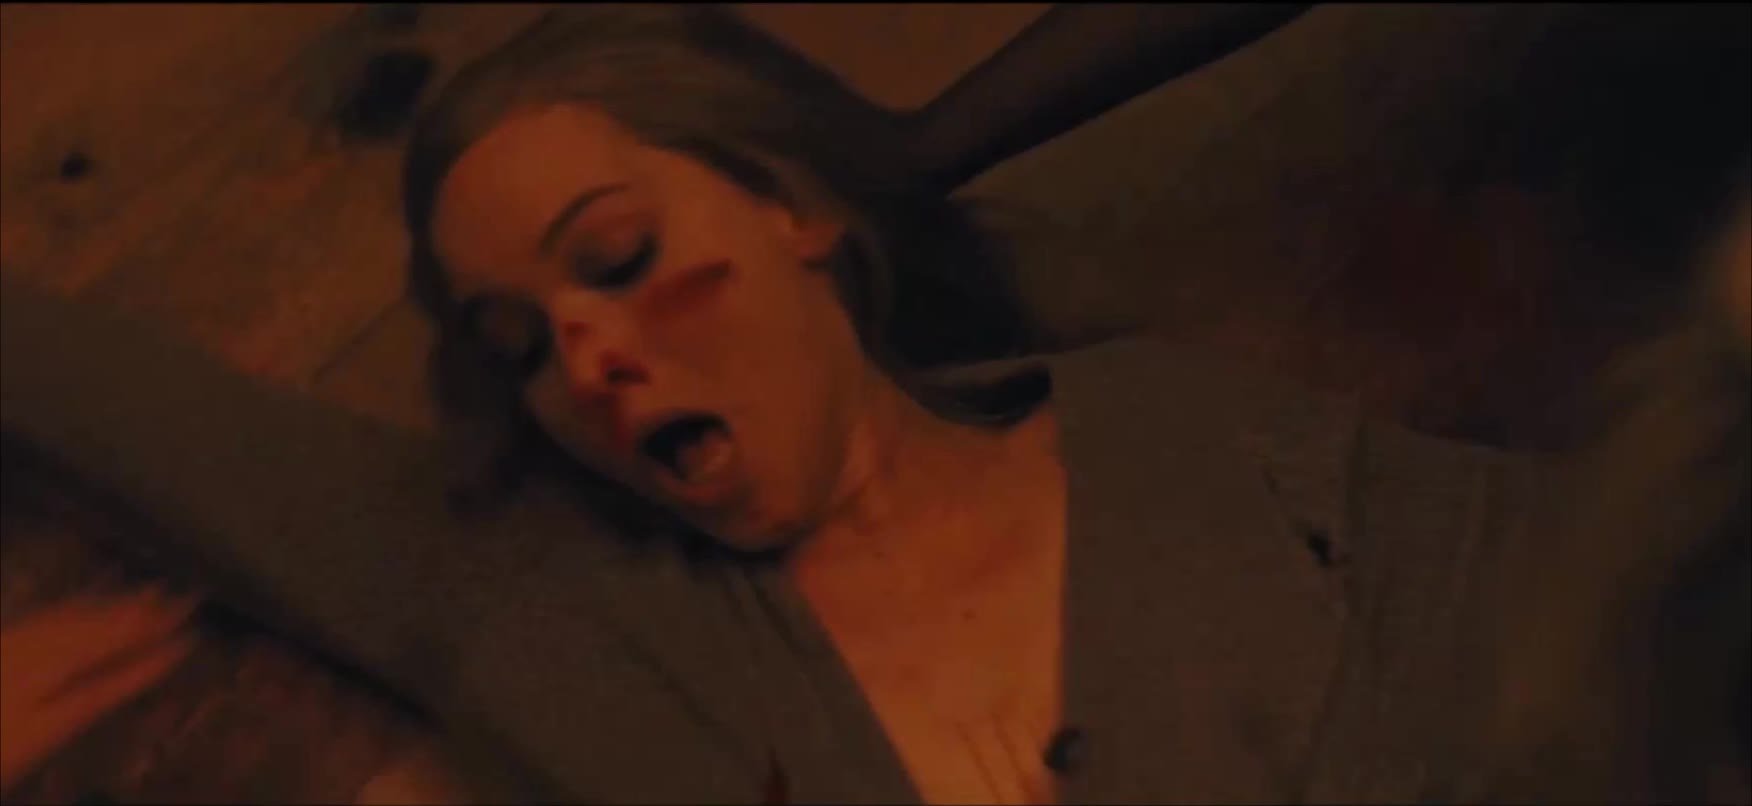 Tits jennifer in mother lawrence 